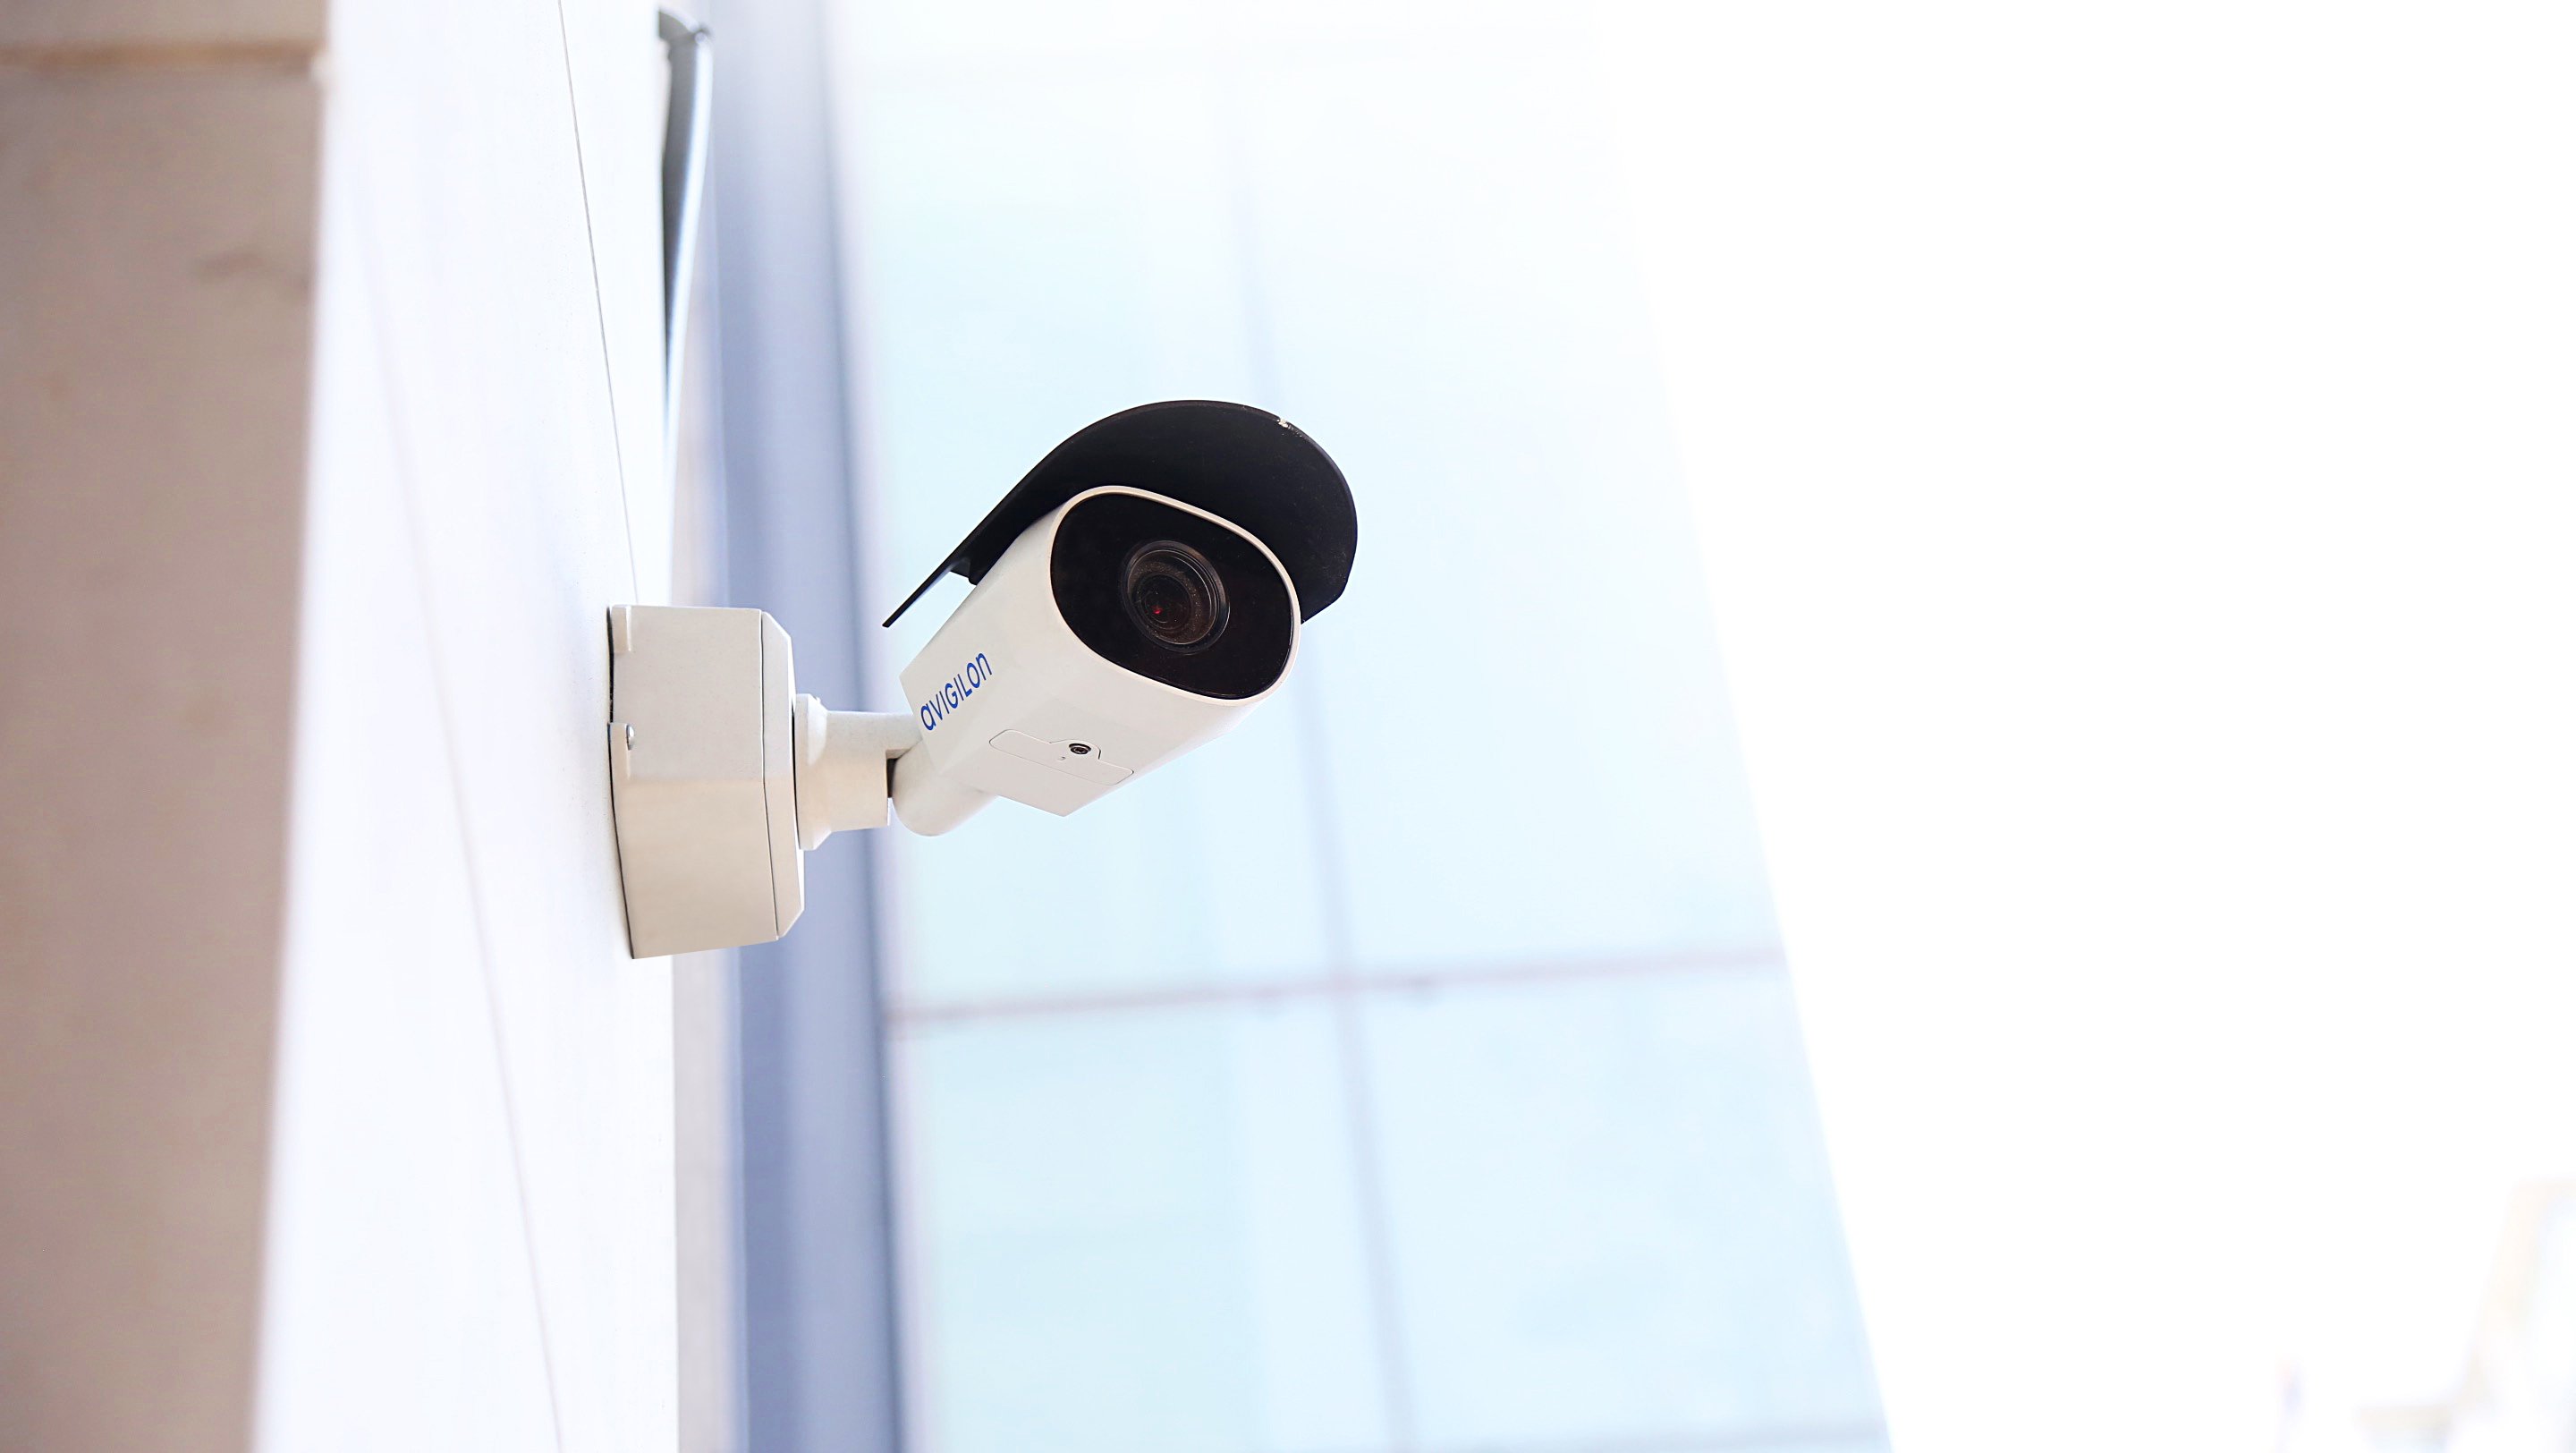 What are the cybersecurity risks with video surveillance?